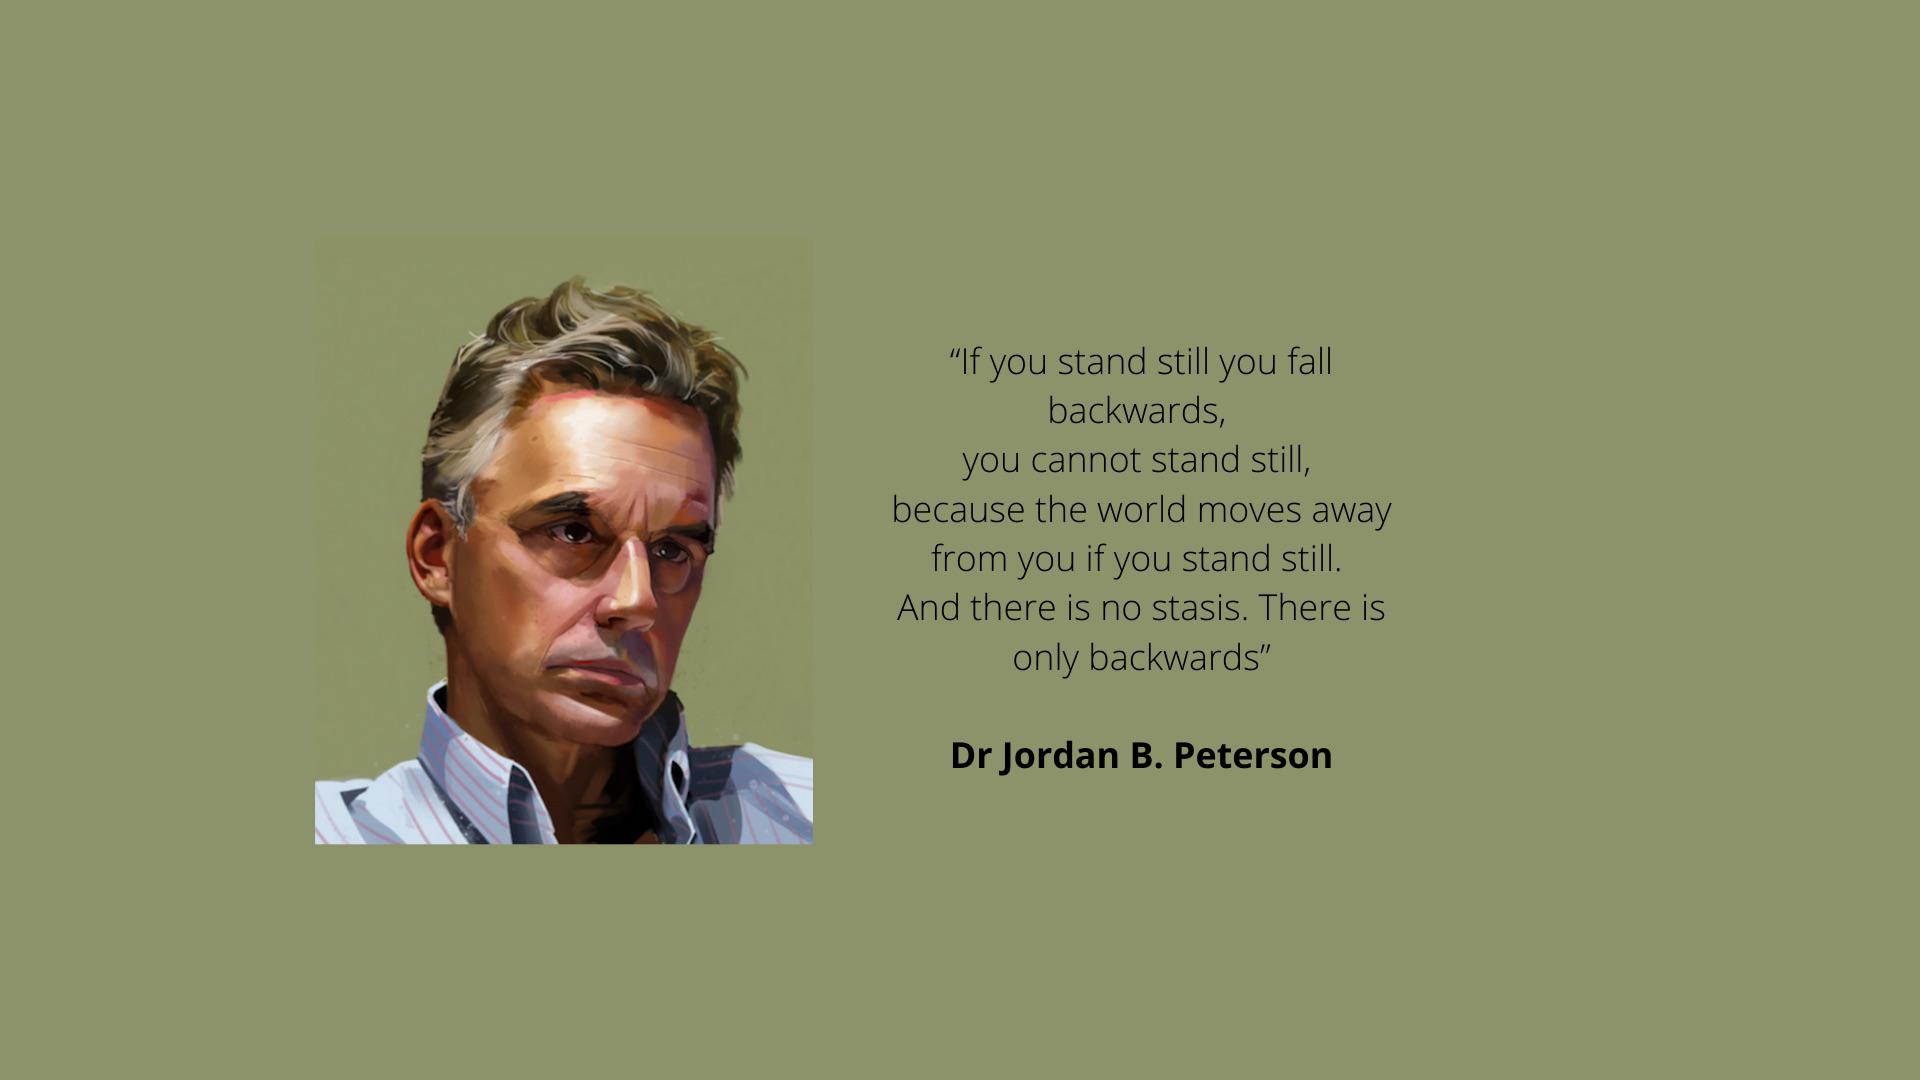 One of my favourite Peterson quotes I made a wallpaper.: JordanPeterson